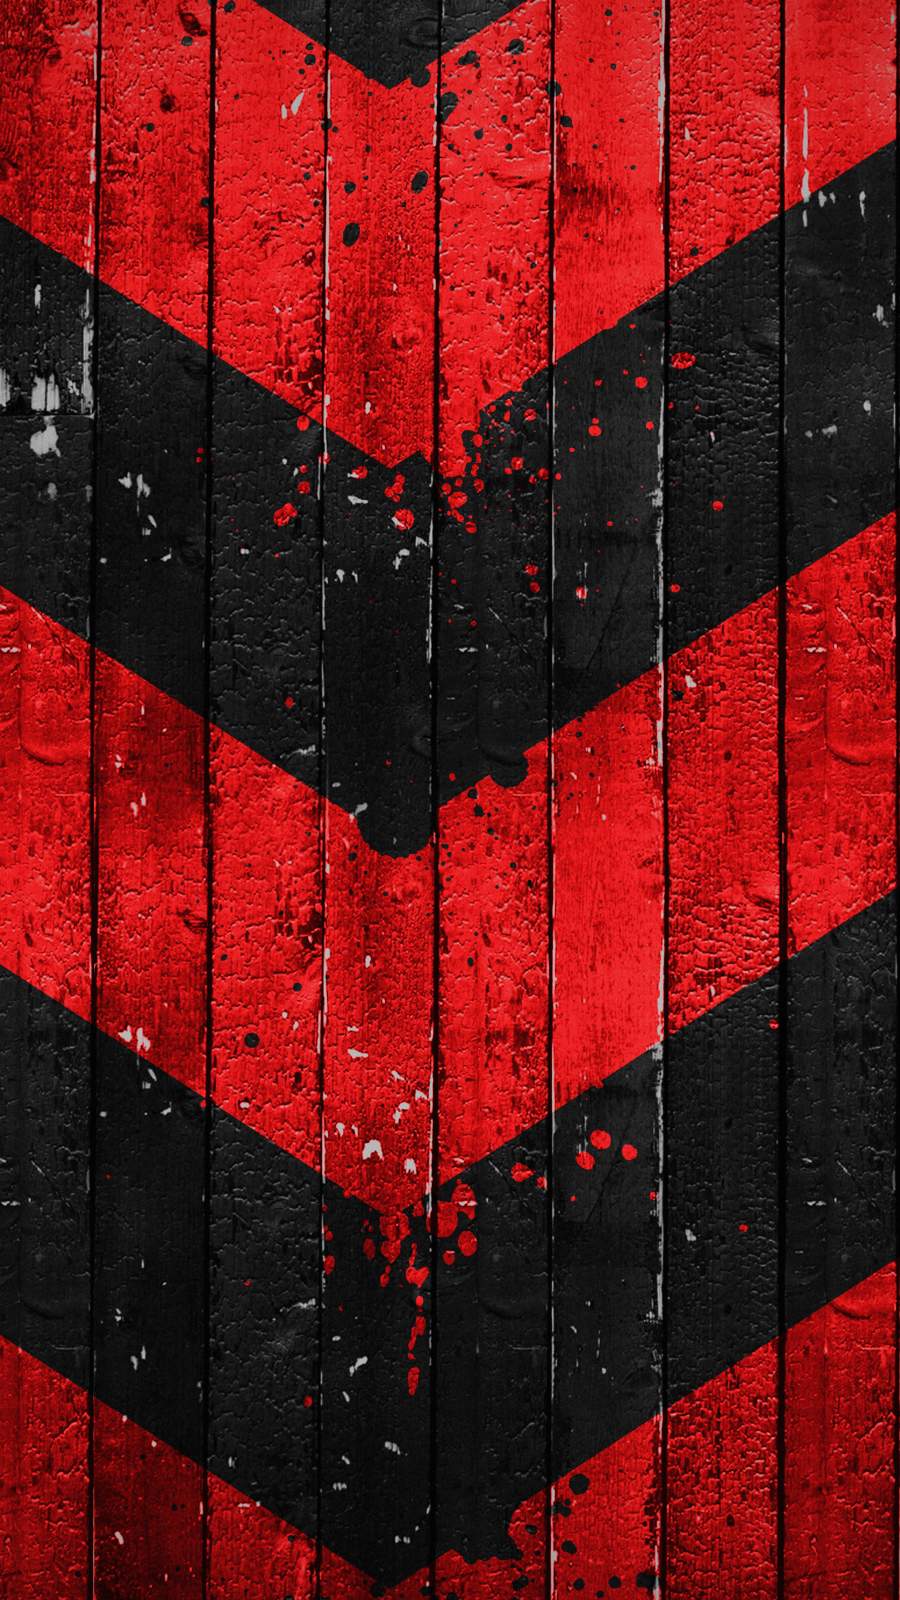 Red And Black IPhone Wallpaper - IPhone Wallpapers : iPhone Wallpapers